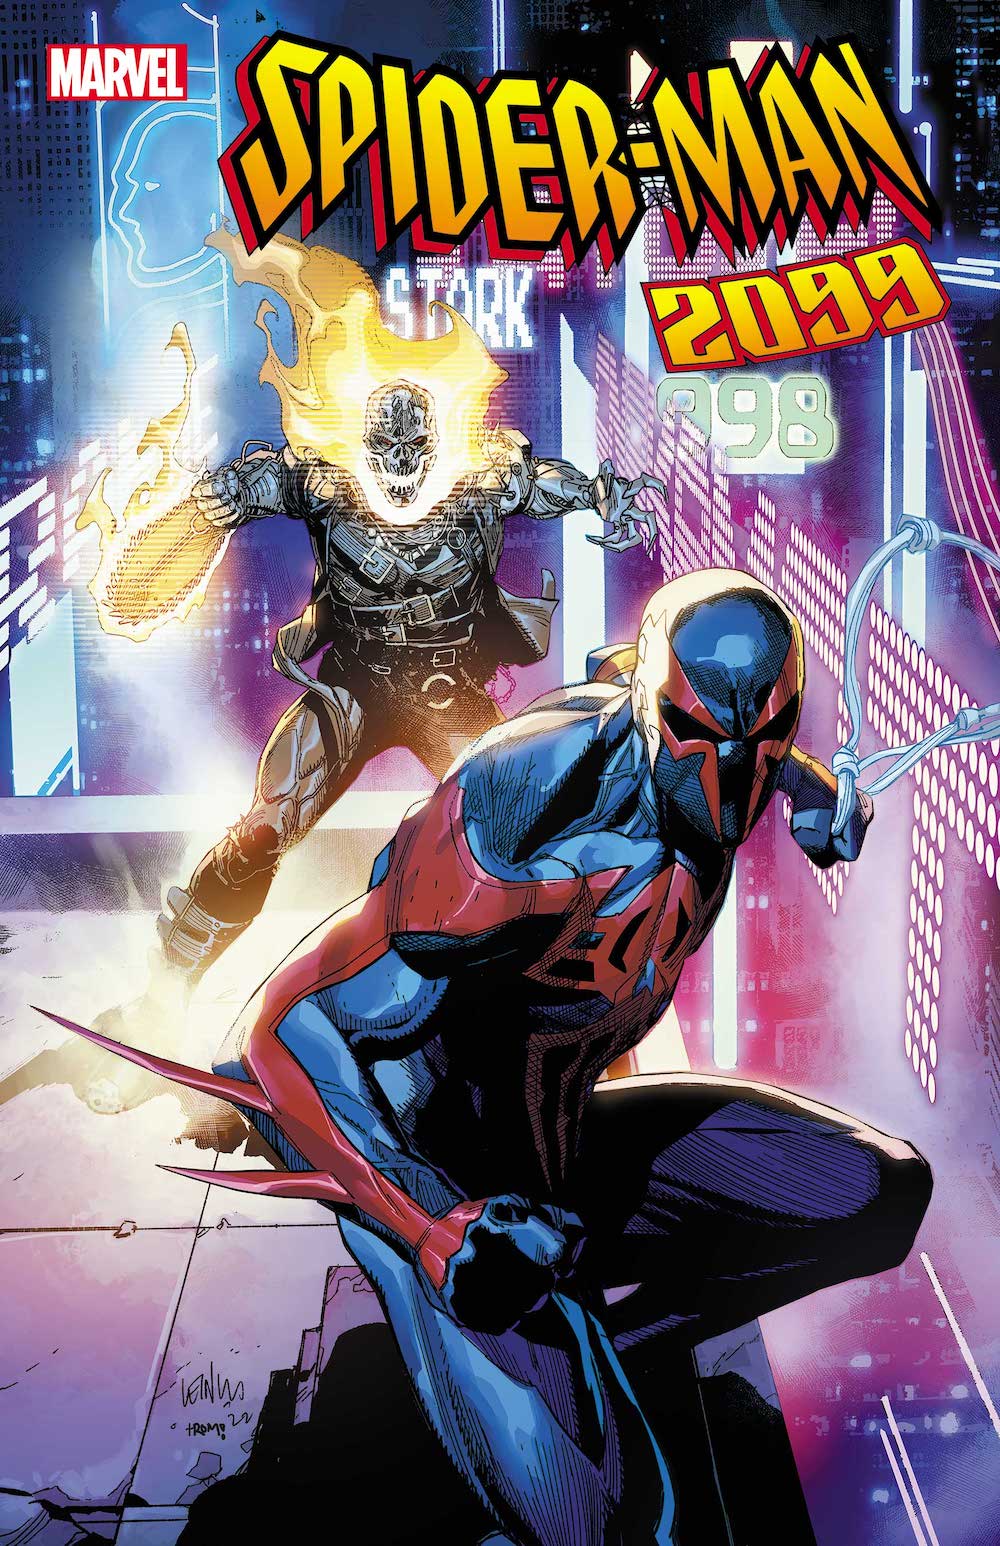 Marvel returning to world of 'Spider-Man 2099' with new series | SYFY WIRE